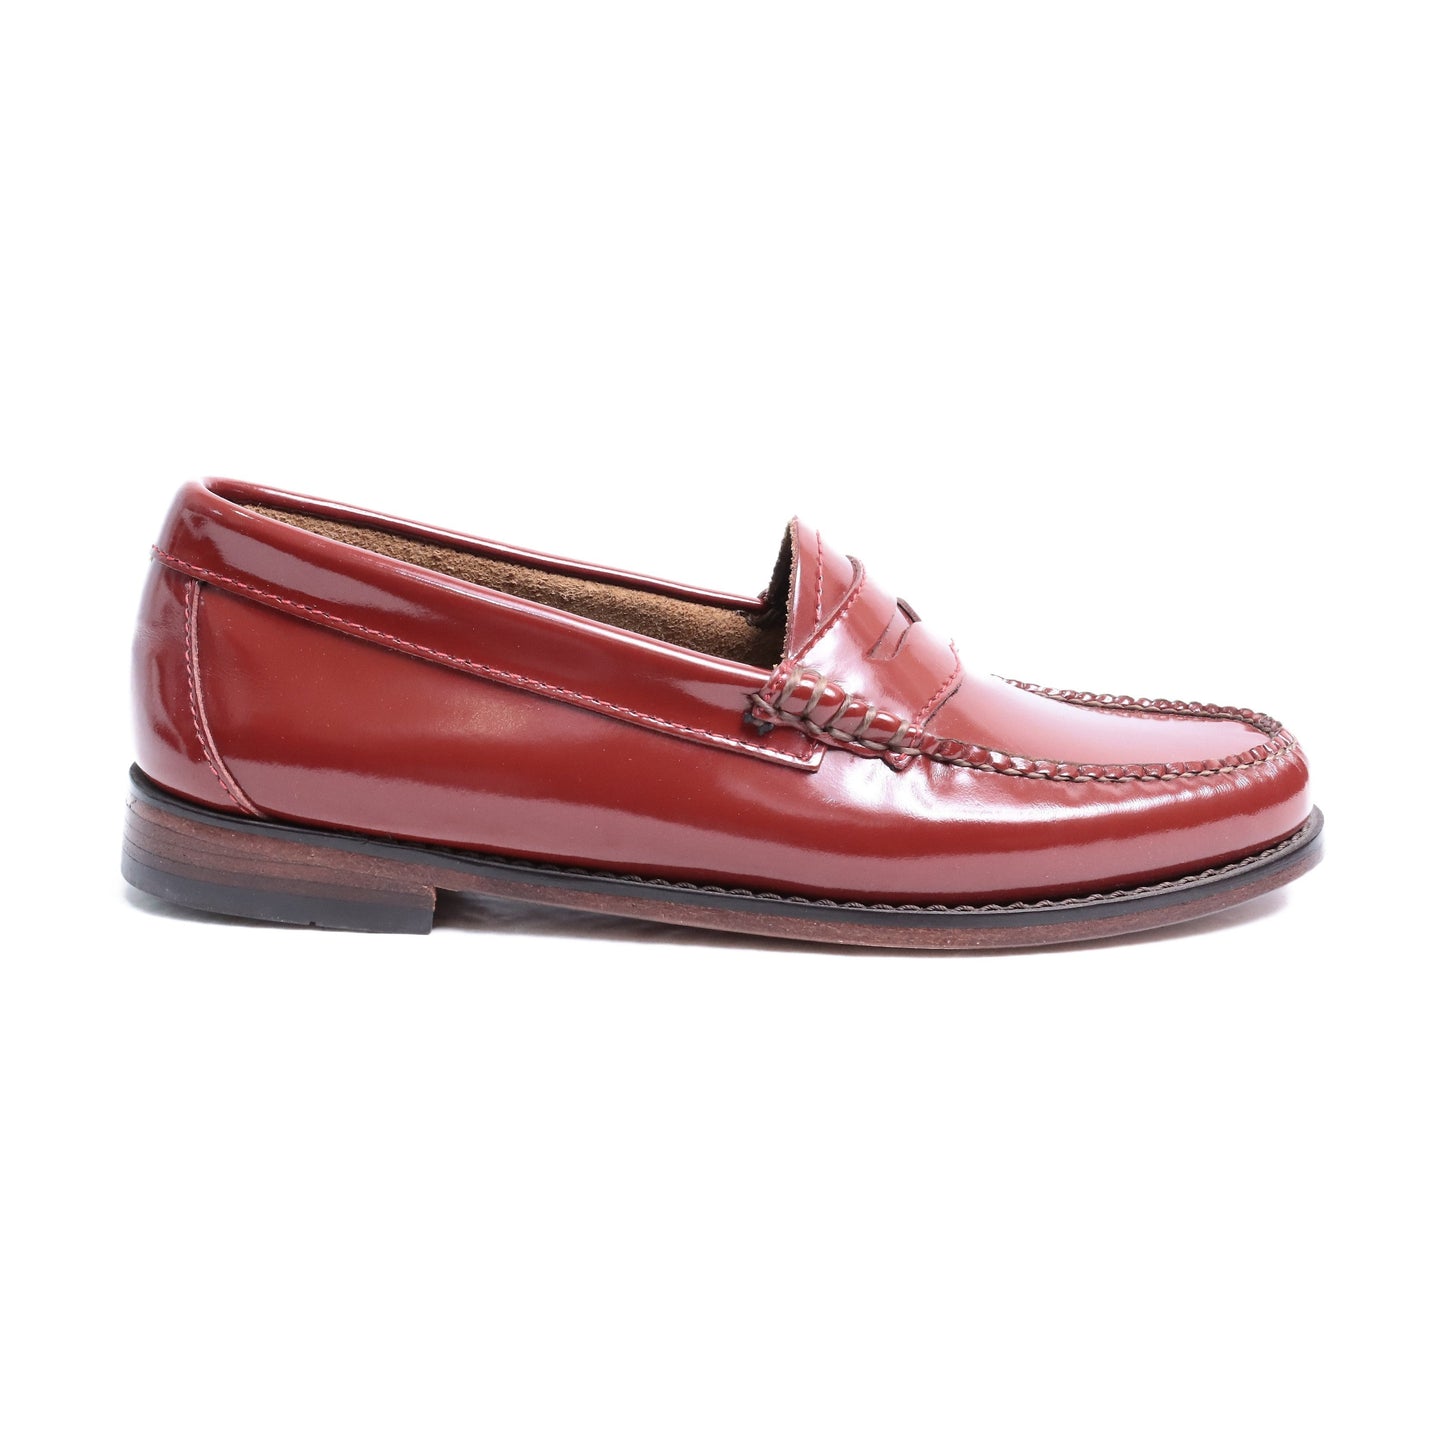 BA94010 / LTHR / RED / LEATHER SOLE / US5.5(23.0cm)